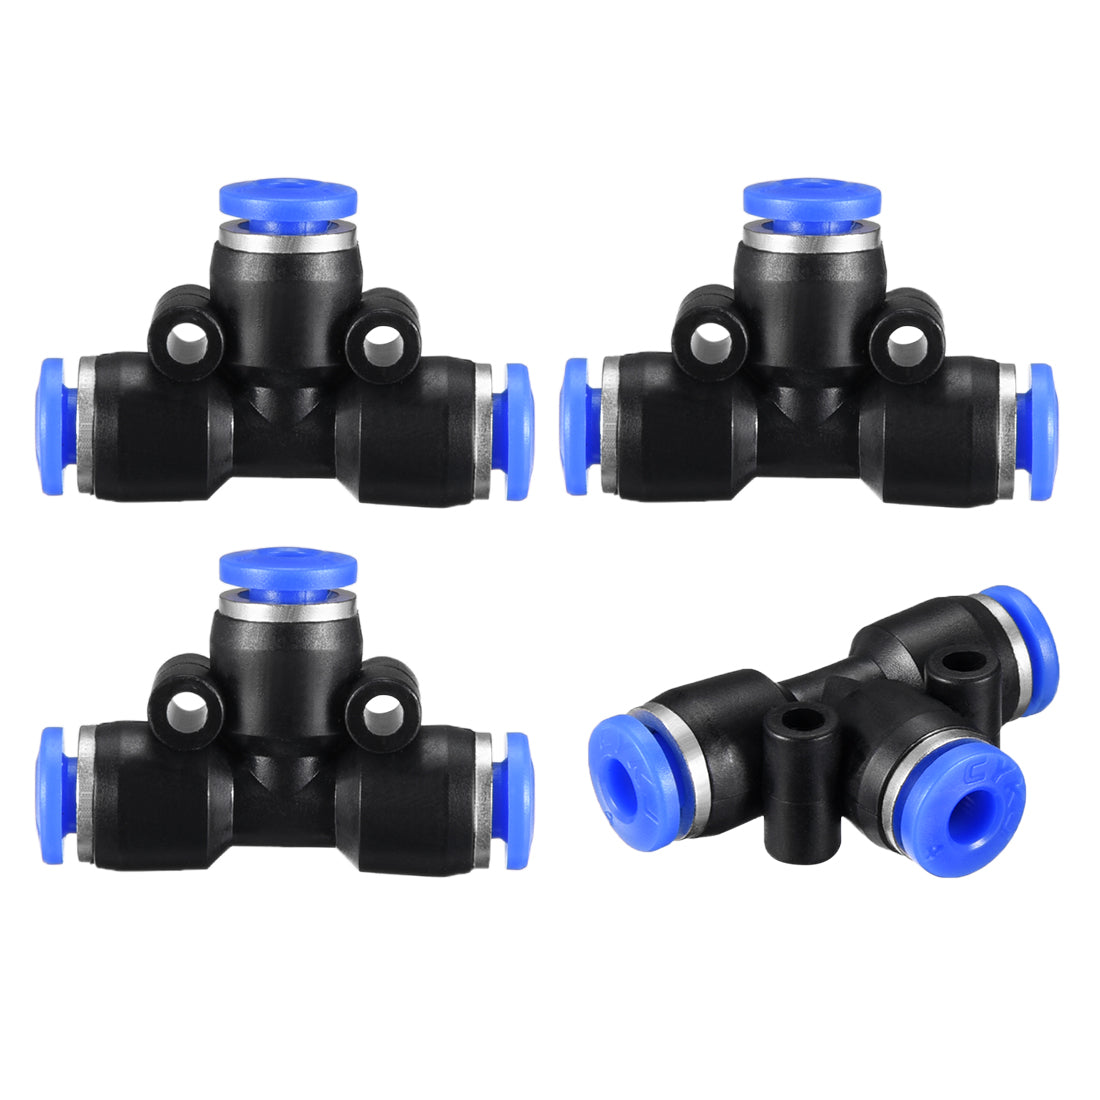 uxcell Uxcell 4pcs Push To Connect Fittings T Type Tube Connect 4mm or 5/32" od Push Fit Fittings Tube Fittings Push Lock Blue  (4mm T tee)